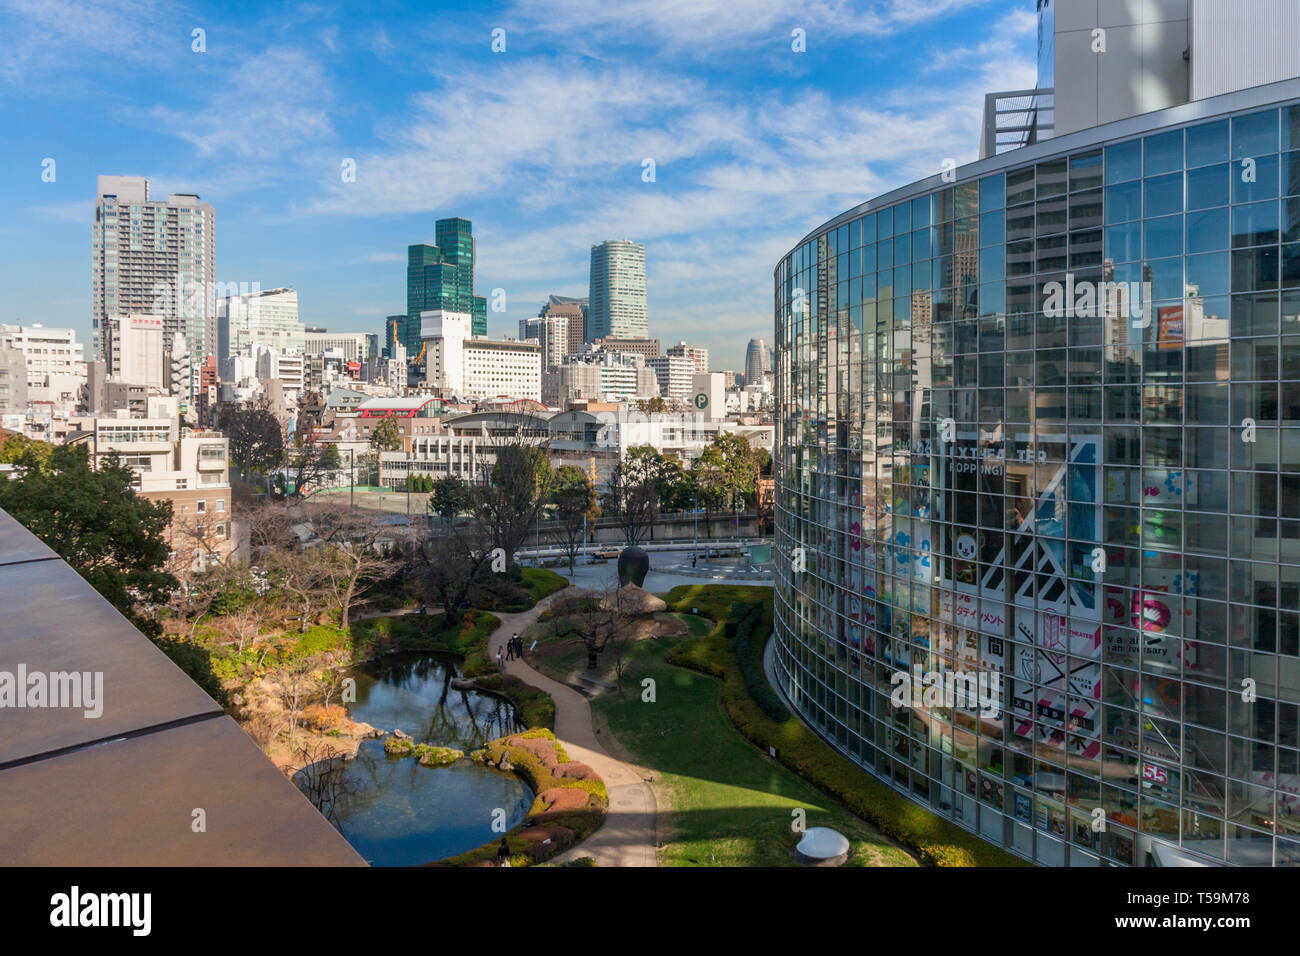 View of the Roppongi district with tall office buildings, the Mori Garden and the TV Asahi headquarters. Tokyo, Japan Stock Photo